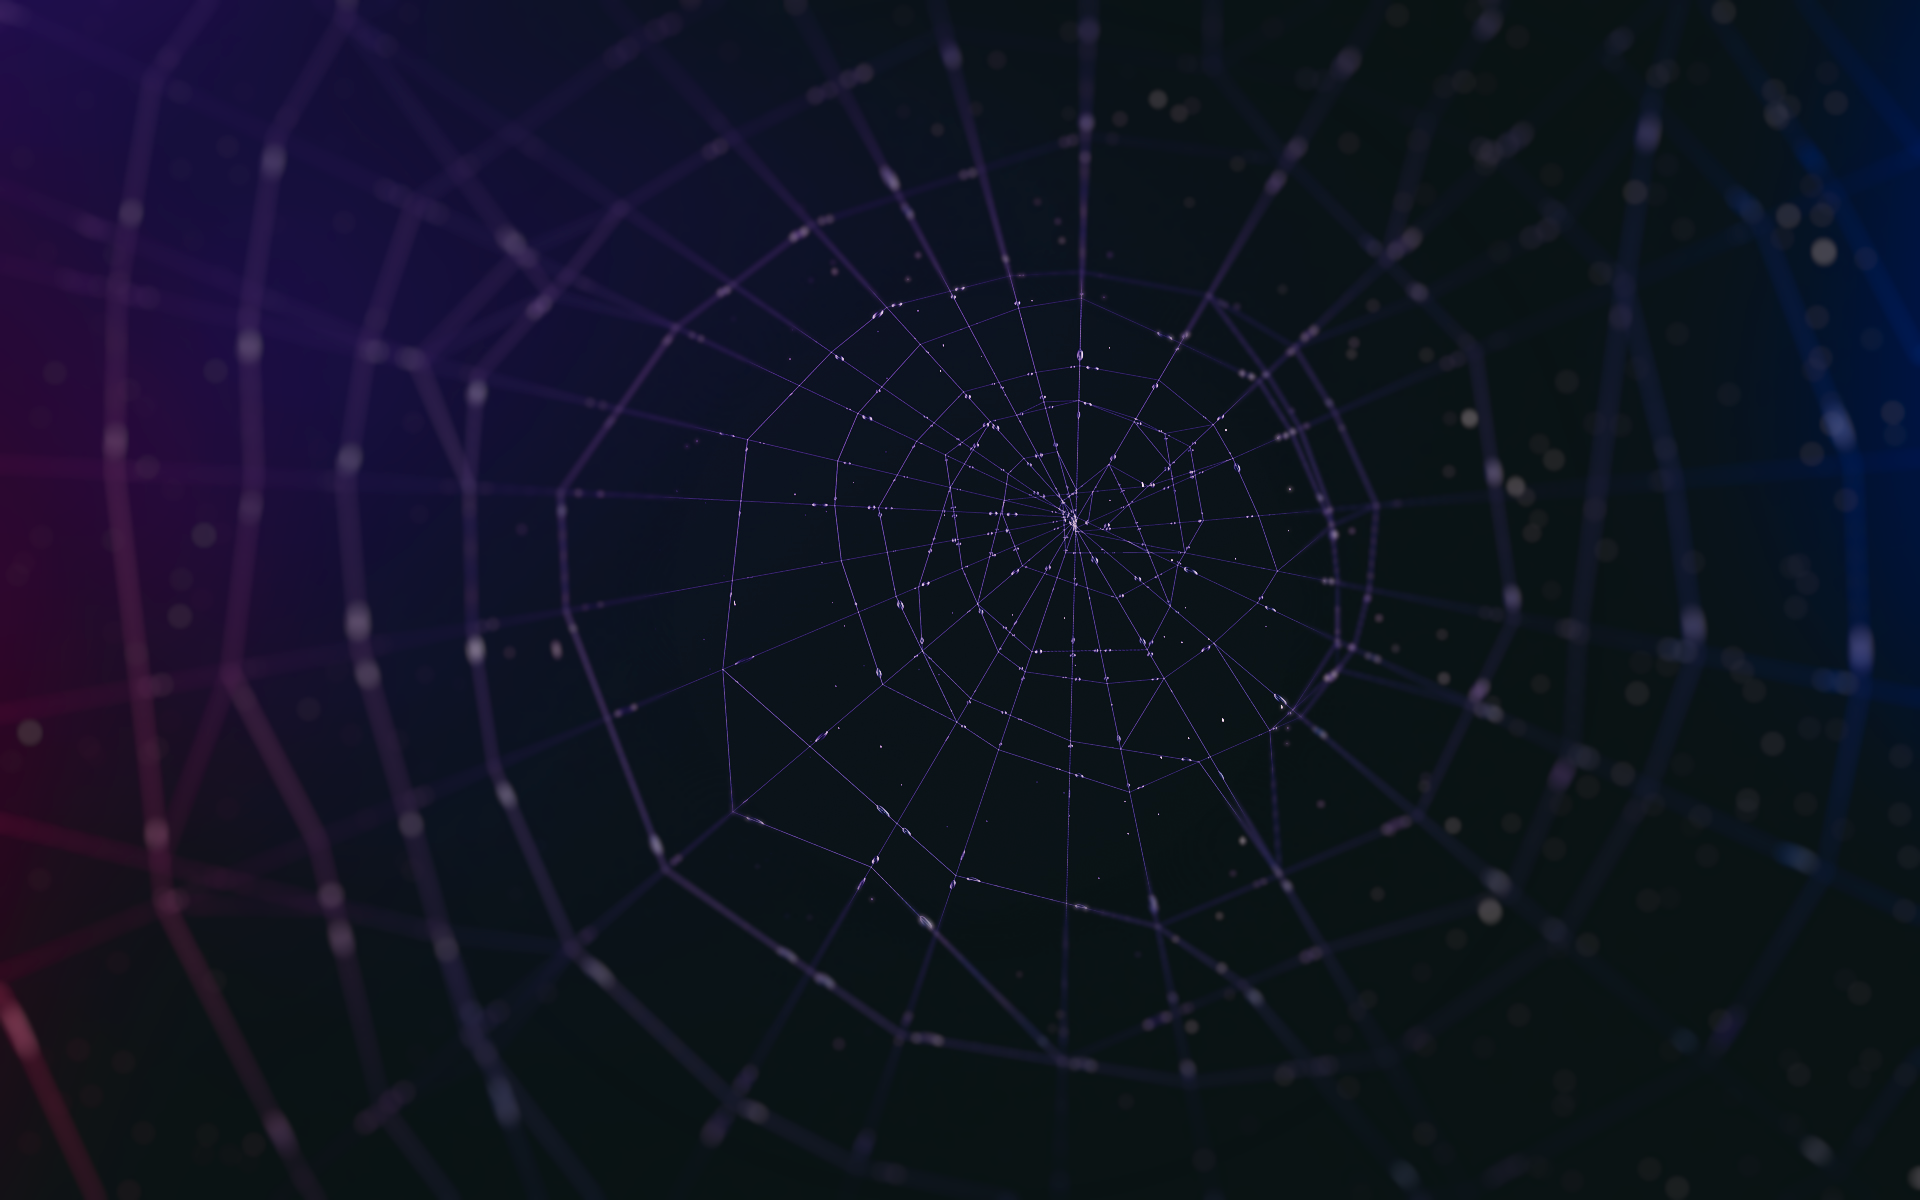 Gallery For Gt Purple Spider Web Background